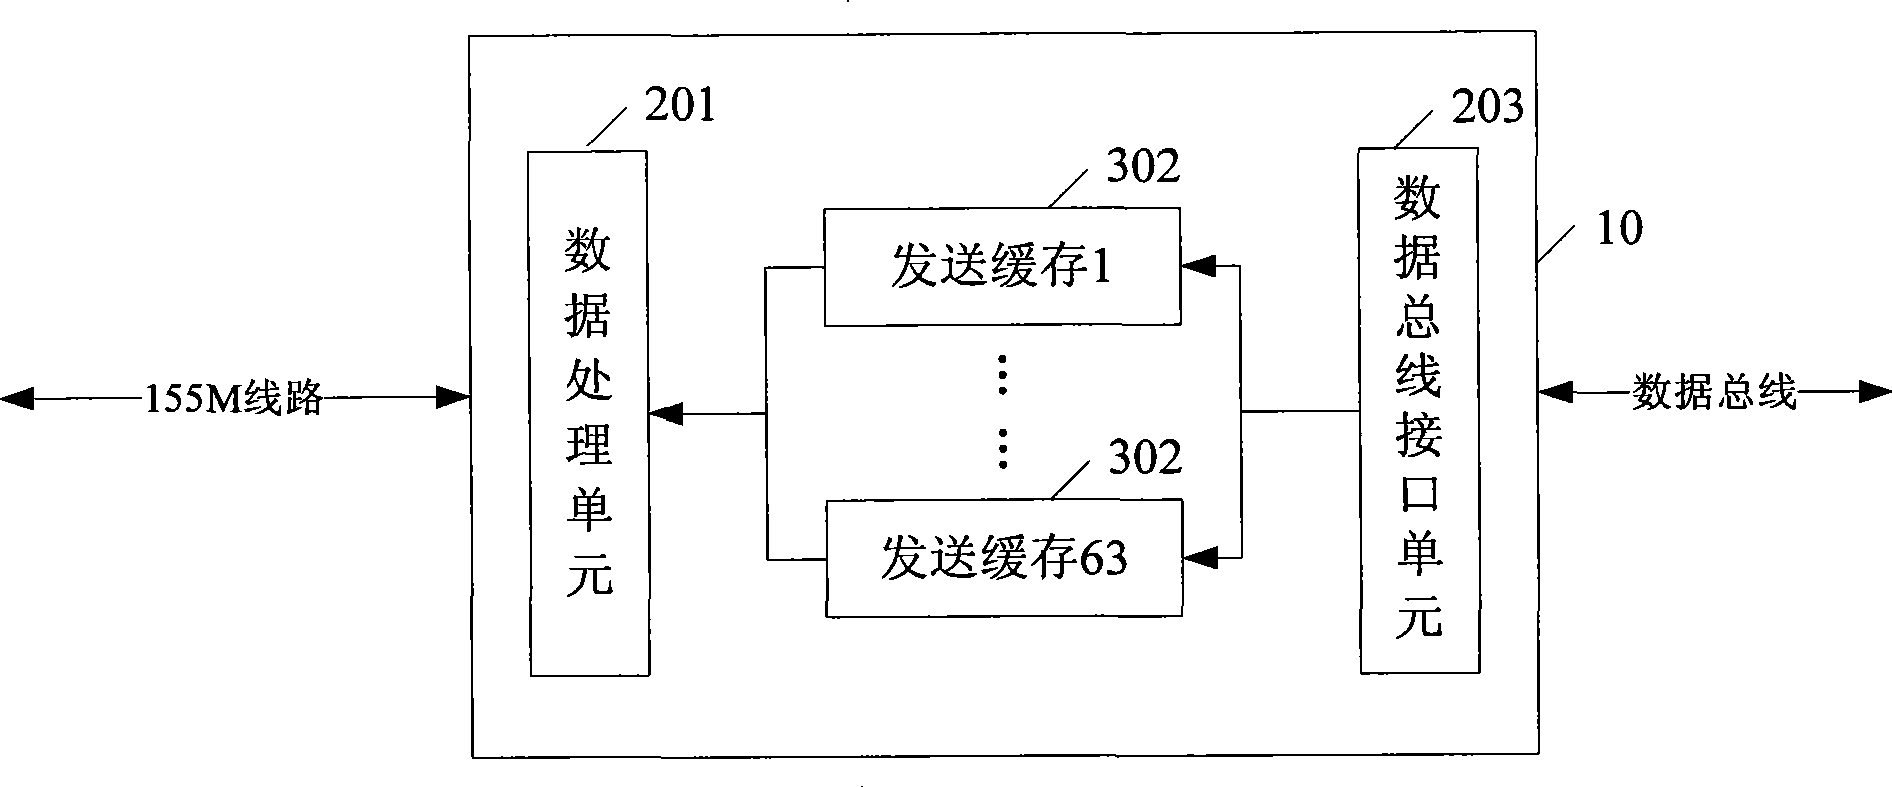 Method and system for controlling data flow